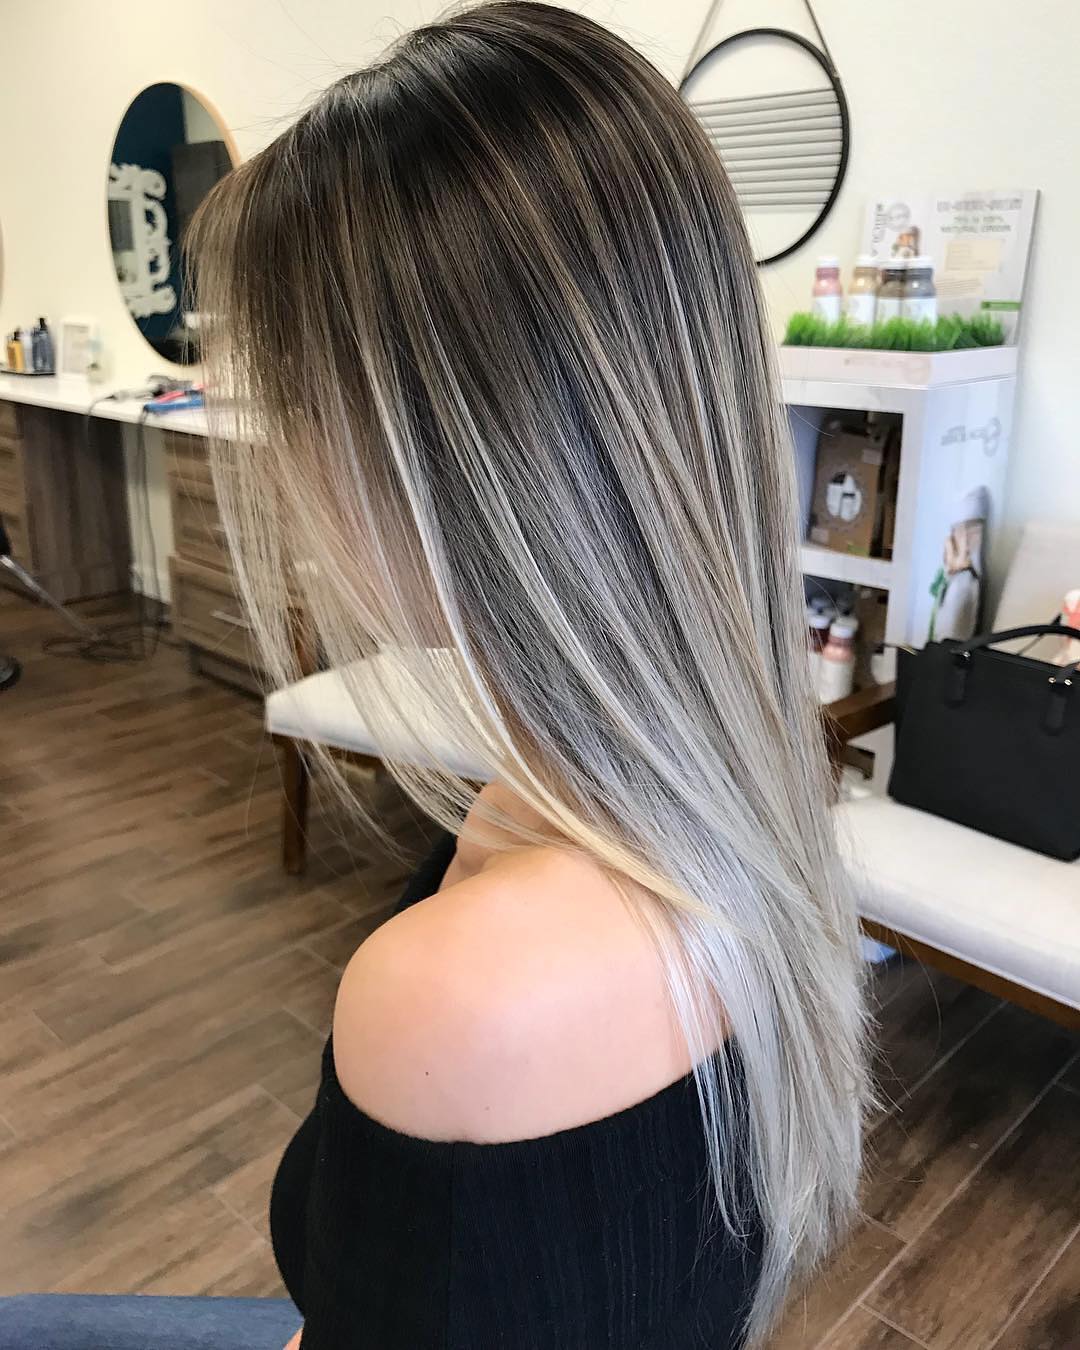 10 Balayage Ombre Long Hair Styles From Subtle To Stunning Long